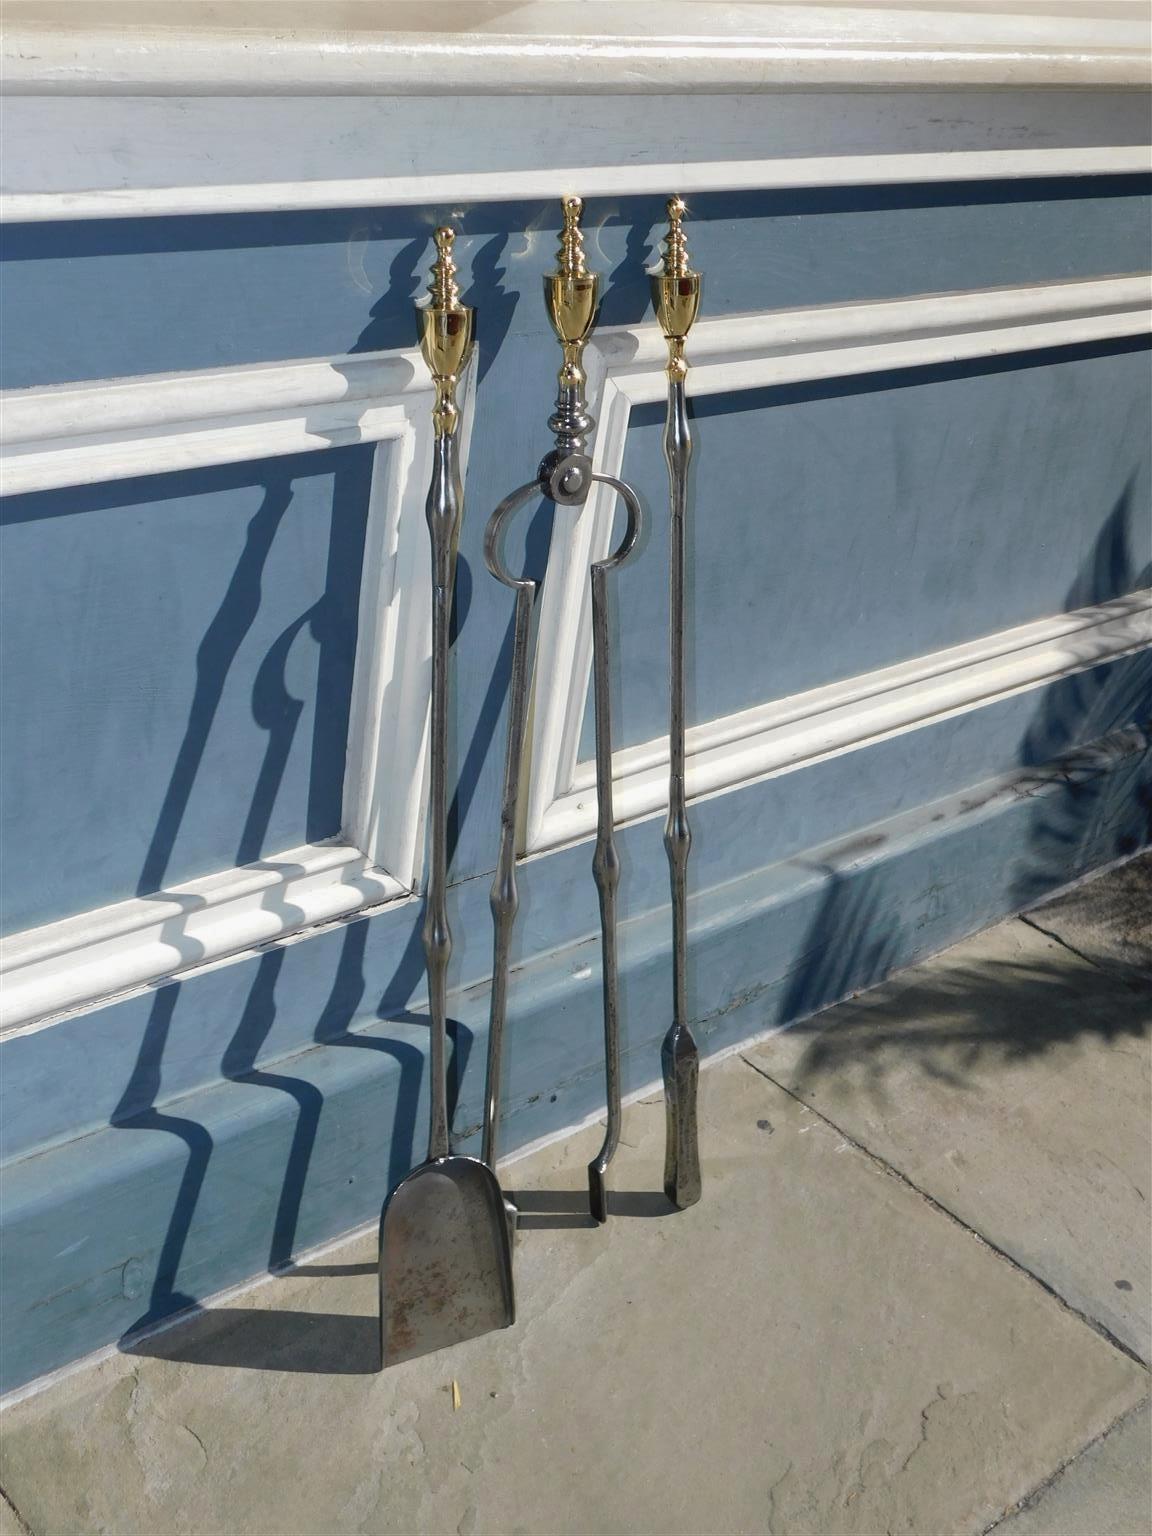 Set of American brass and polished steel urn finial Bulbous fire tools, early 19th century. Set consist of Shovel, Tong and Poker.